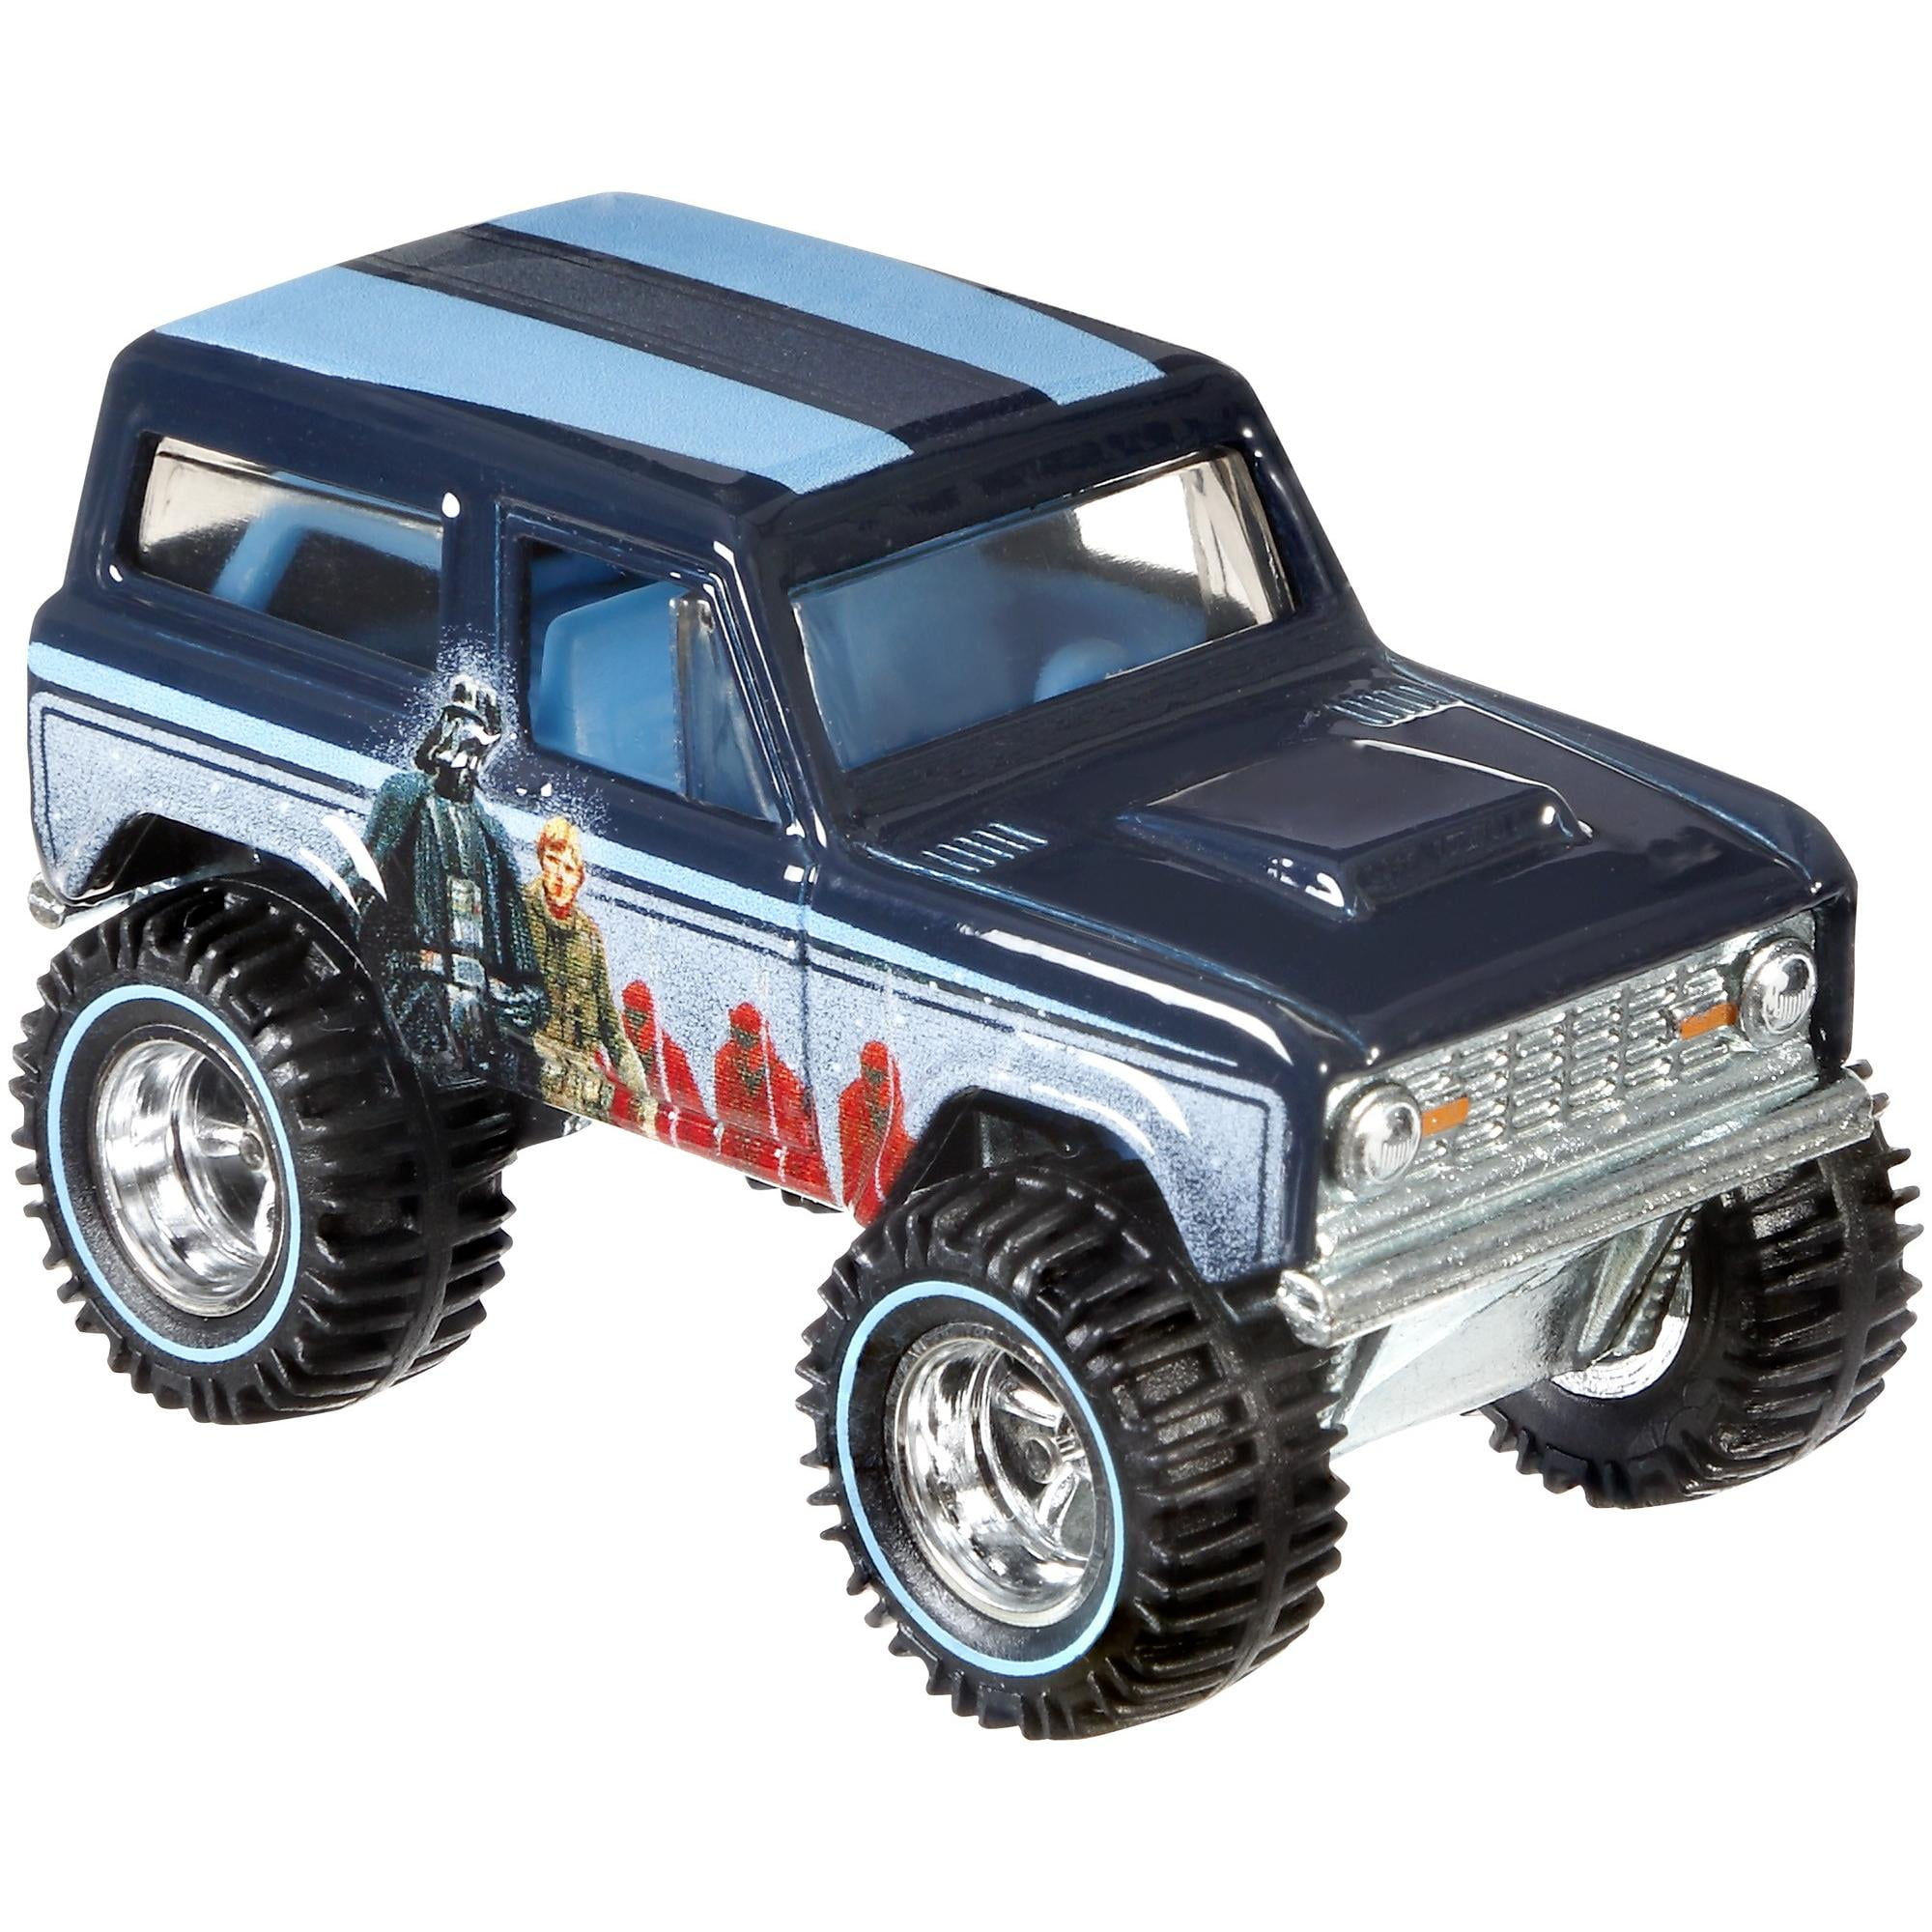 Details about   2019 HOT WHEELS COLLECTION EDITION 67 FORD BRONCO Metal car Mattel sealed 